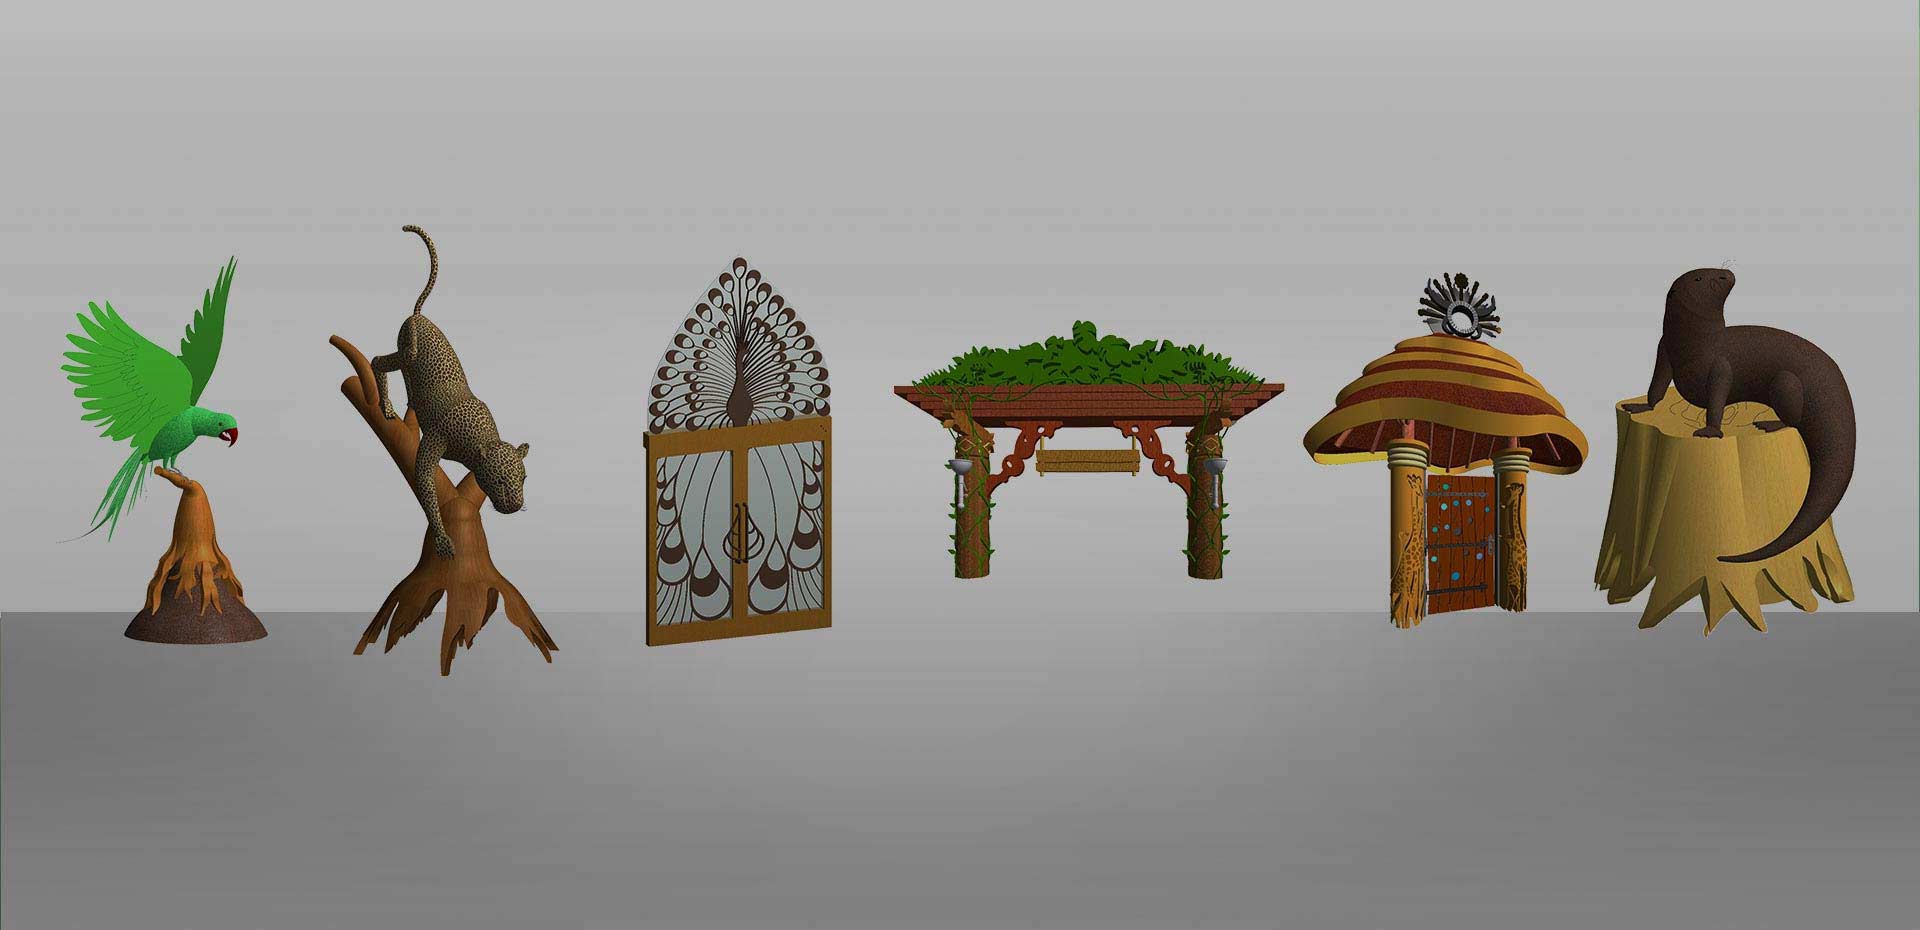 Revit Family creation of a zoo project for design presentation, Doha Banner